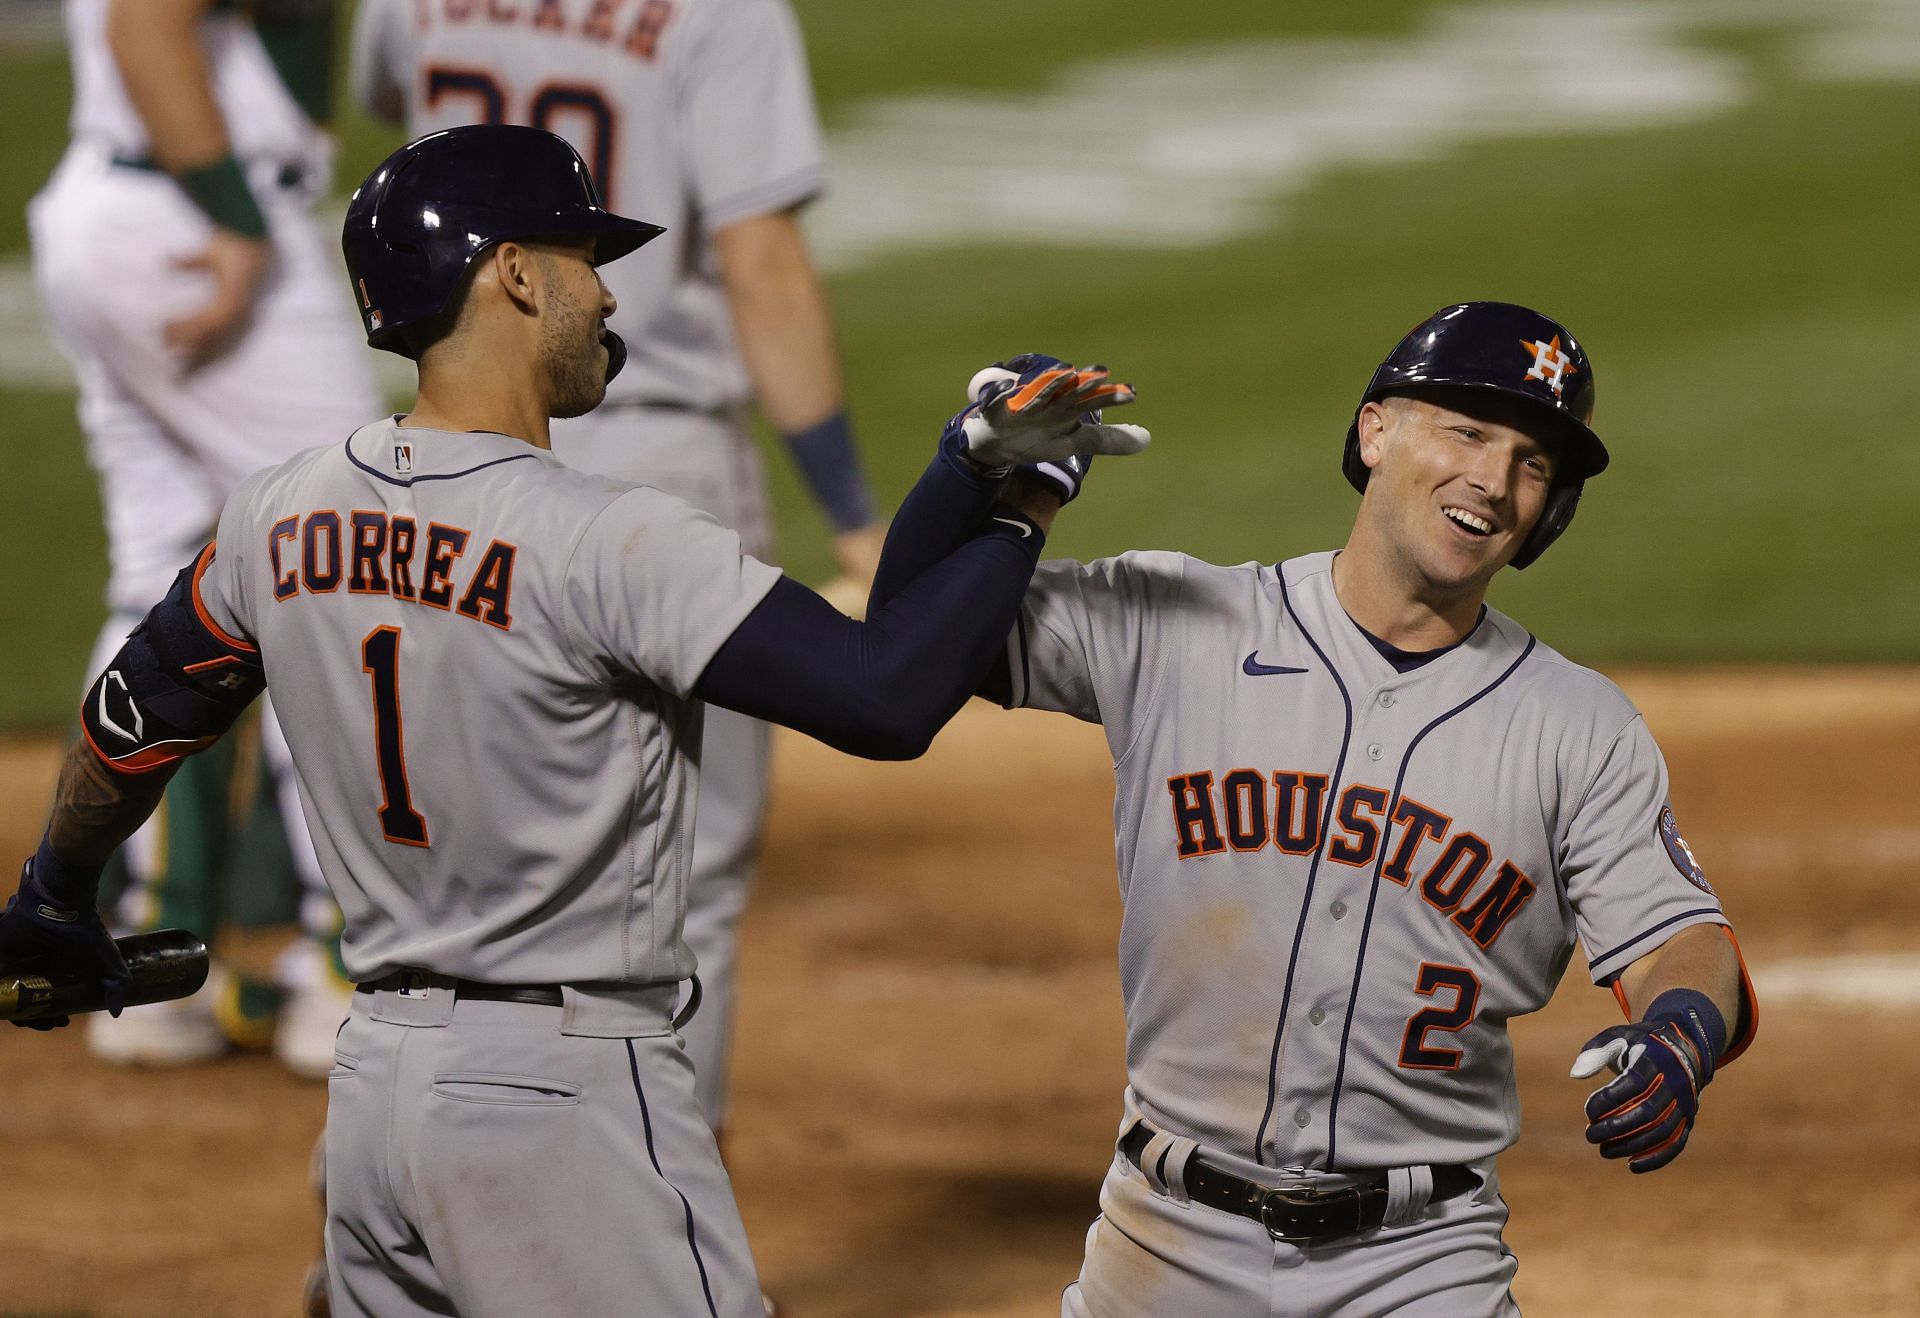 Can the Houston Astros win without Correa?